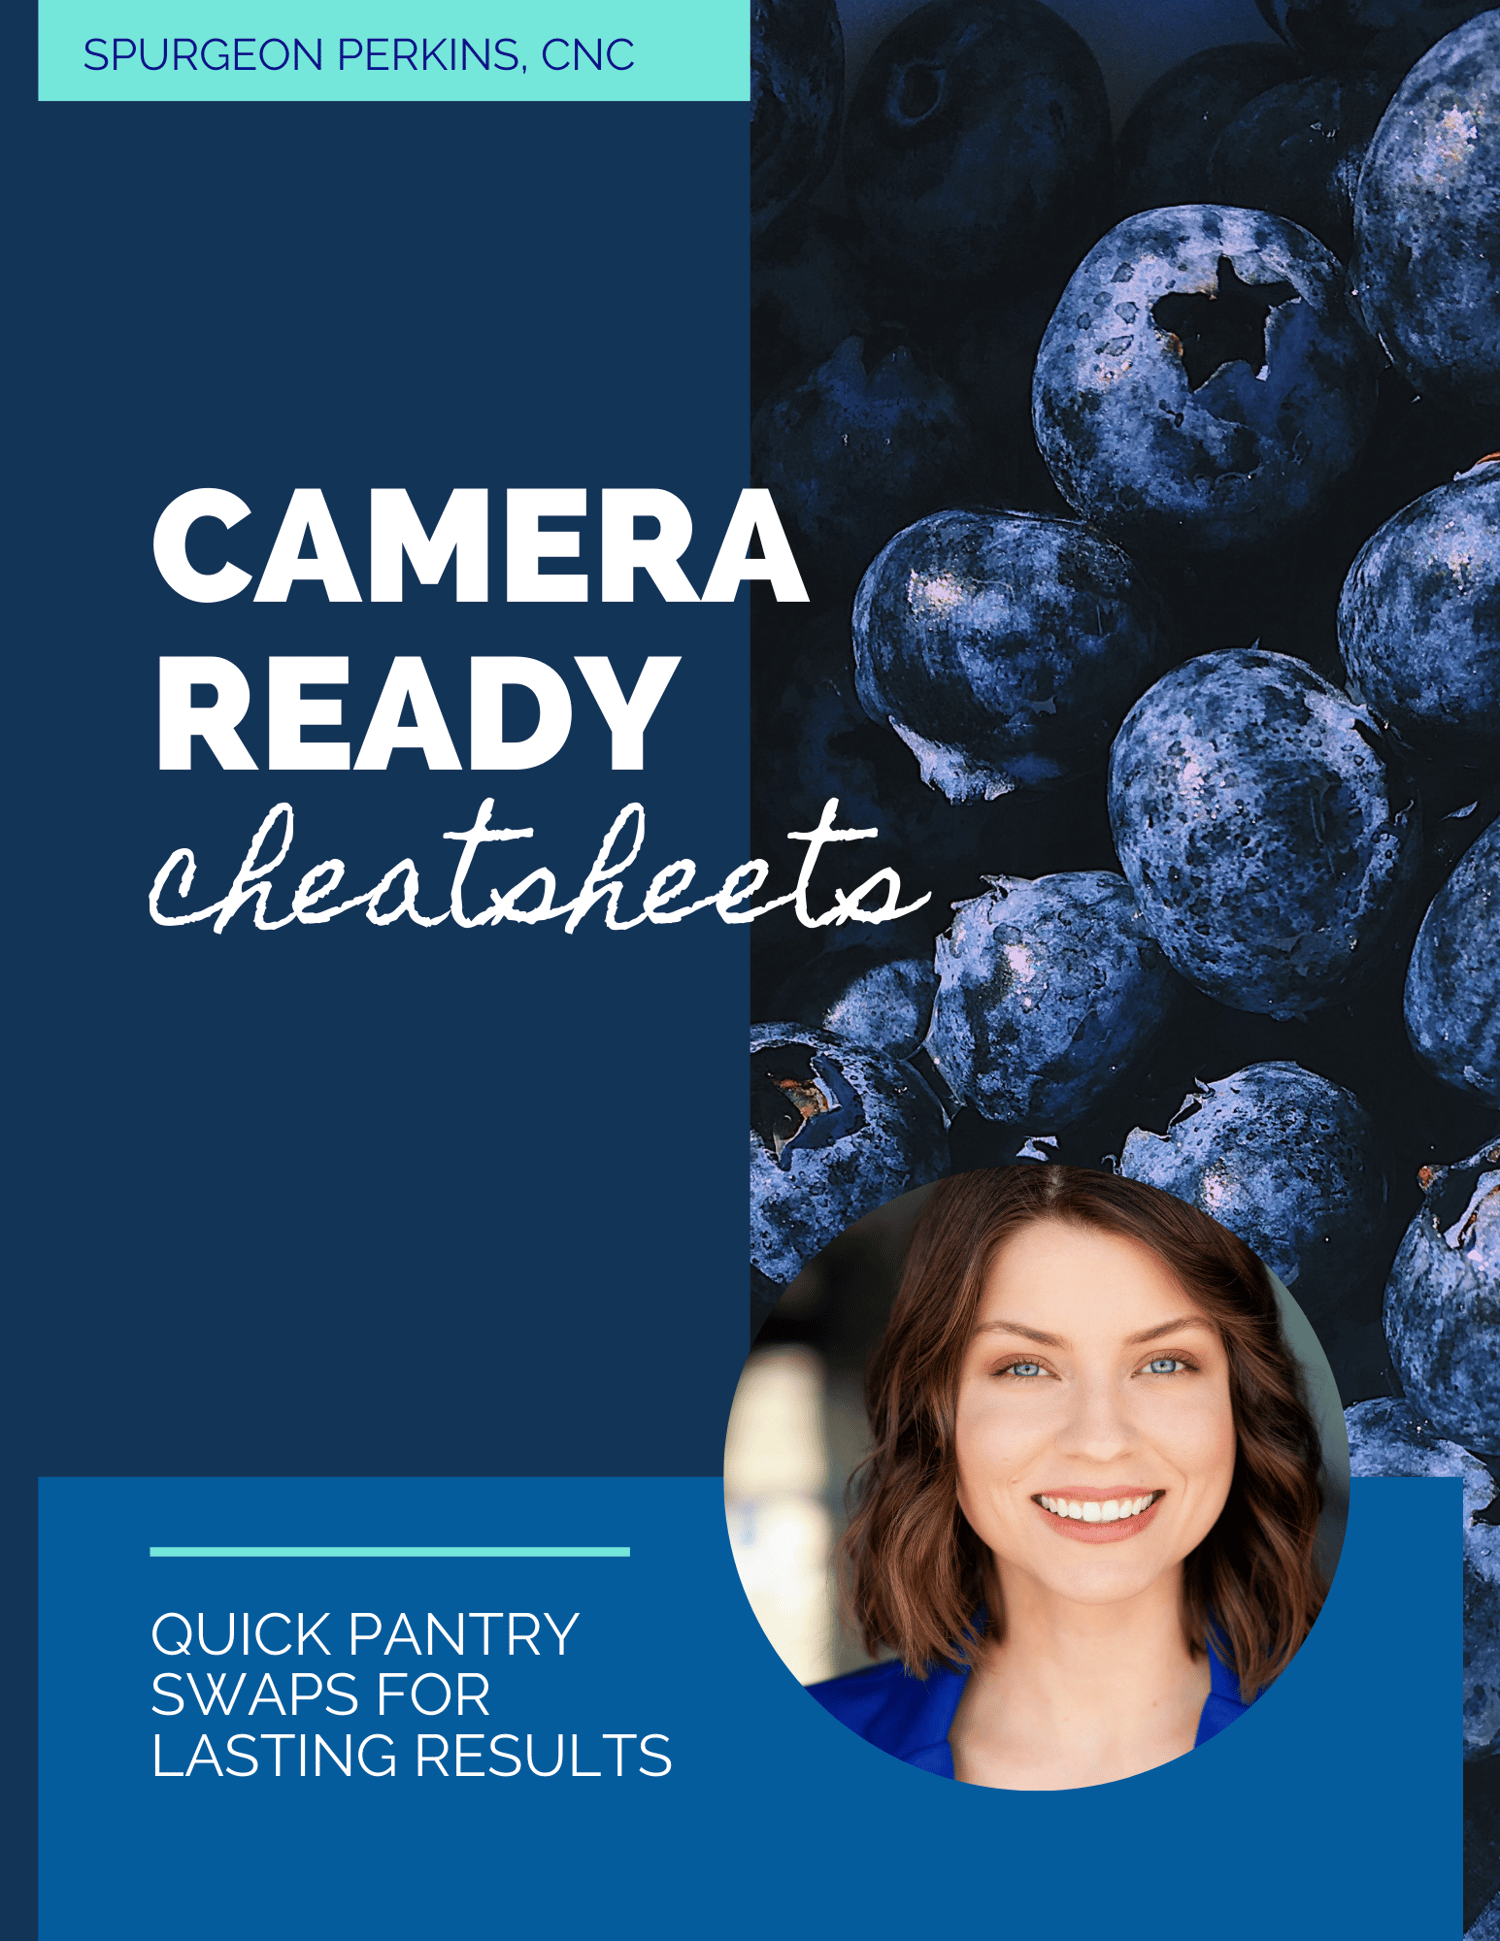 camera ready cheatsheets quick pantry swaps for lasting results next to a photo of blueberries